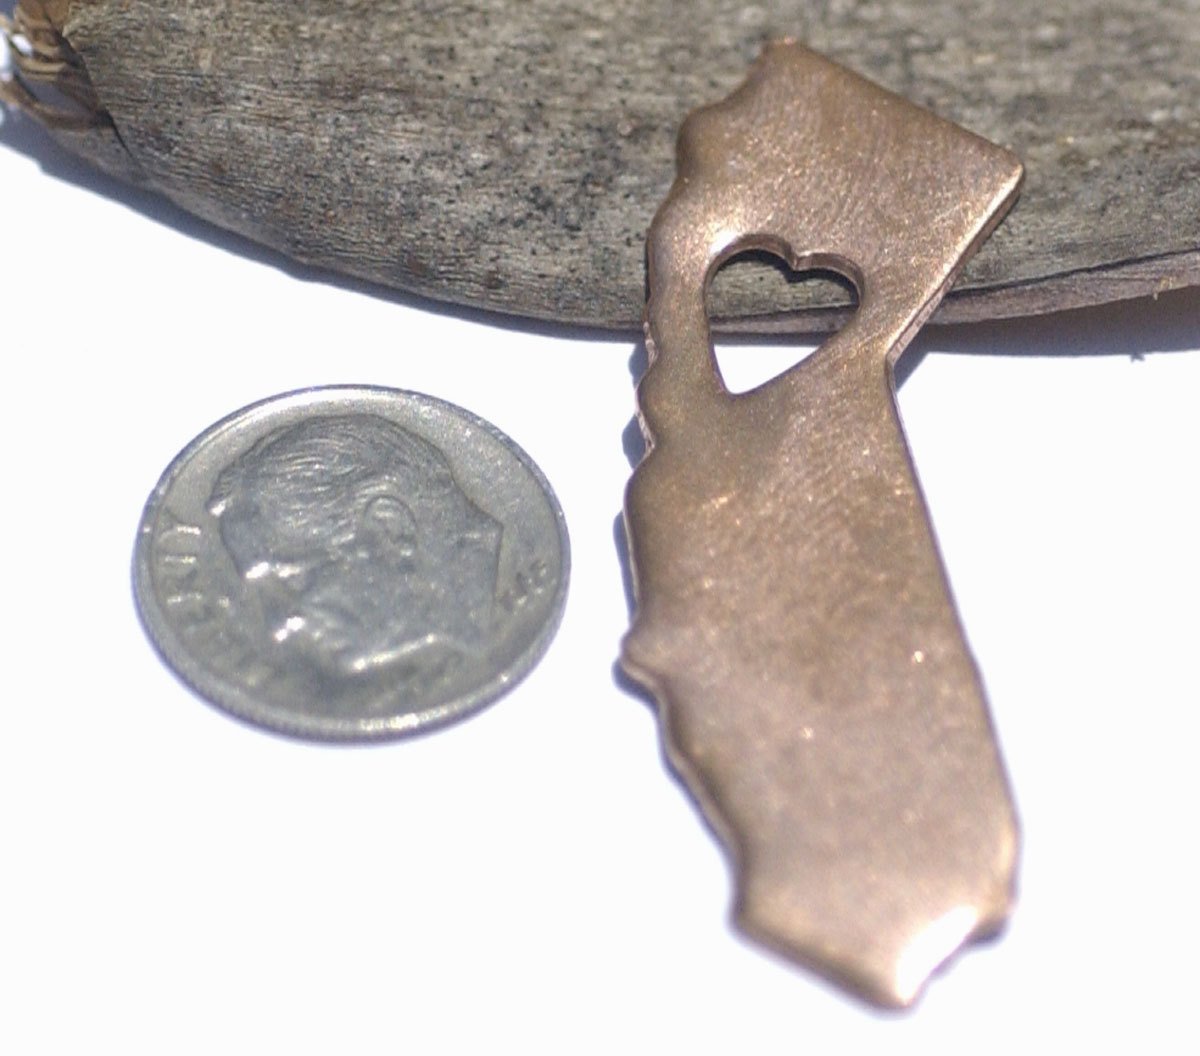 California State With Tiny Long Heart Blanks Cutout for Enameling Metalworking Stamping Texturing - Variety of Metals